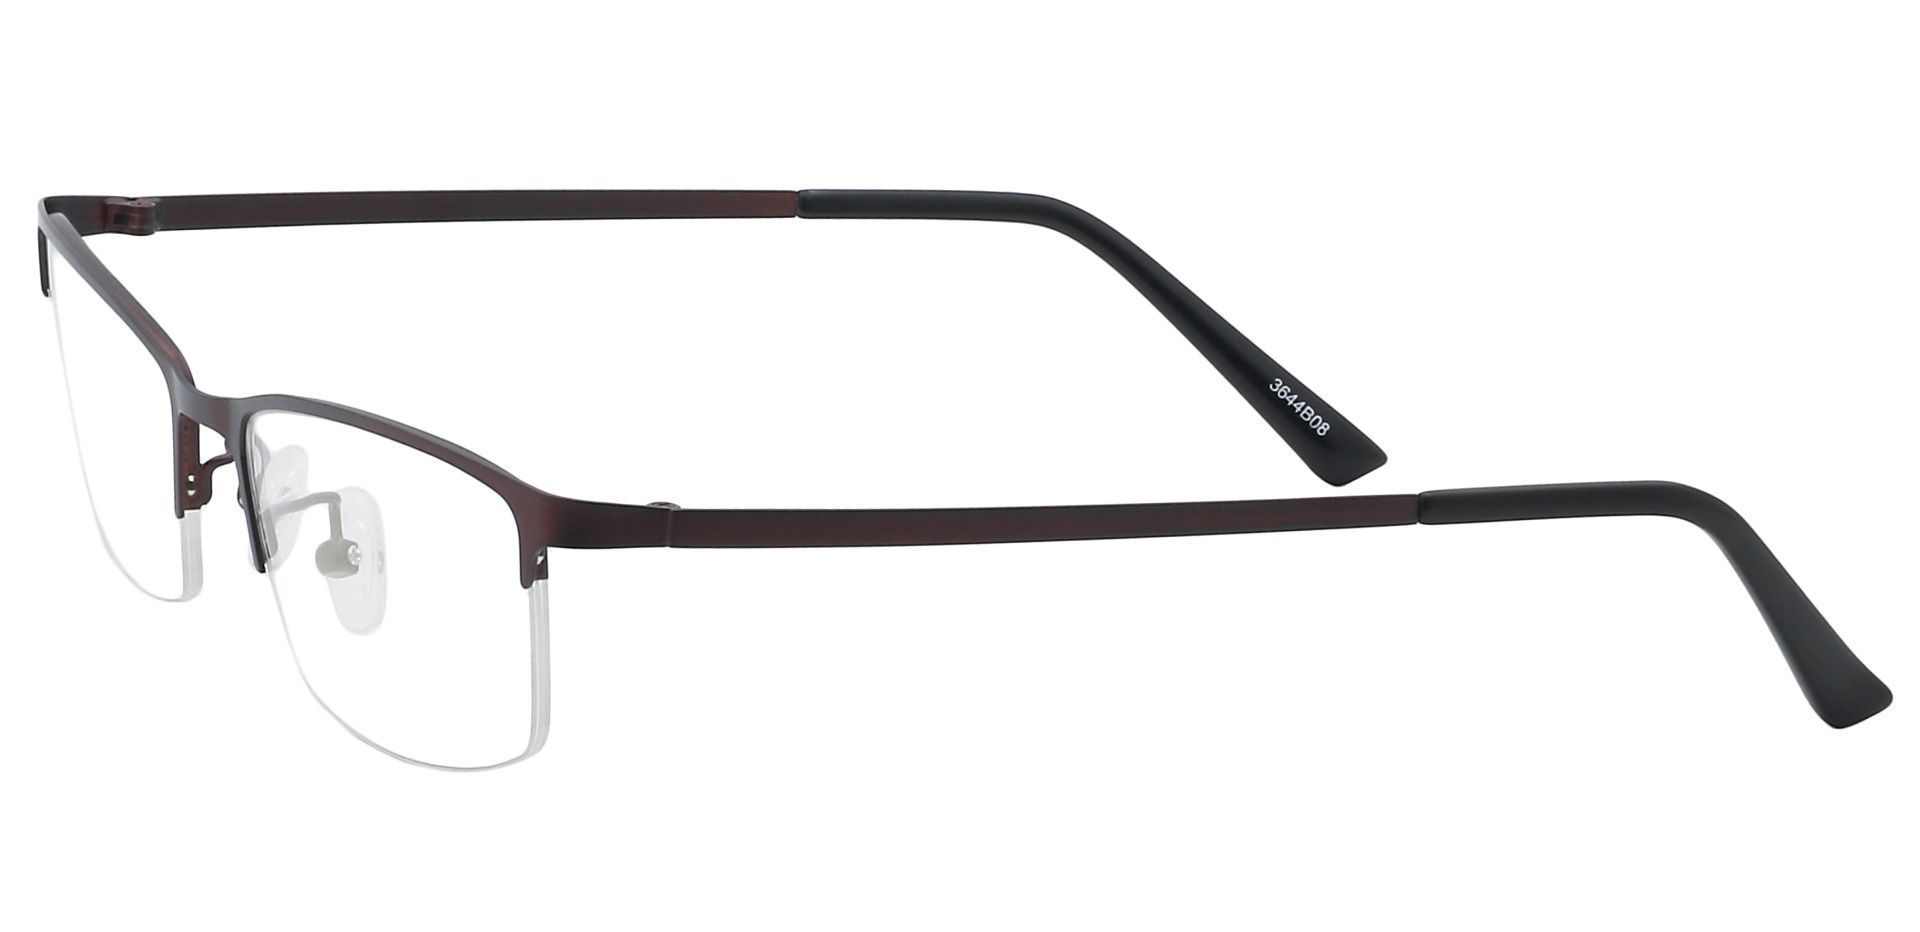 Parsley Rectangle Non-Rx Glasses - Brown